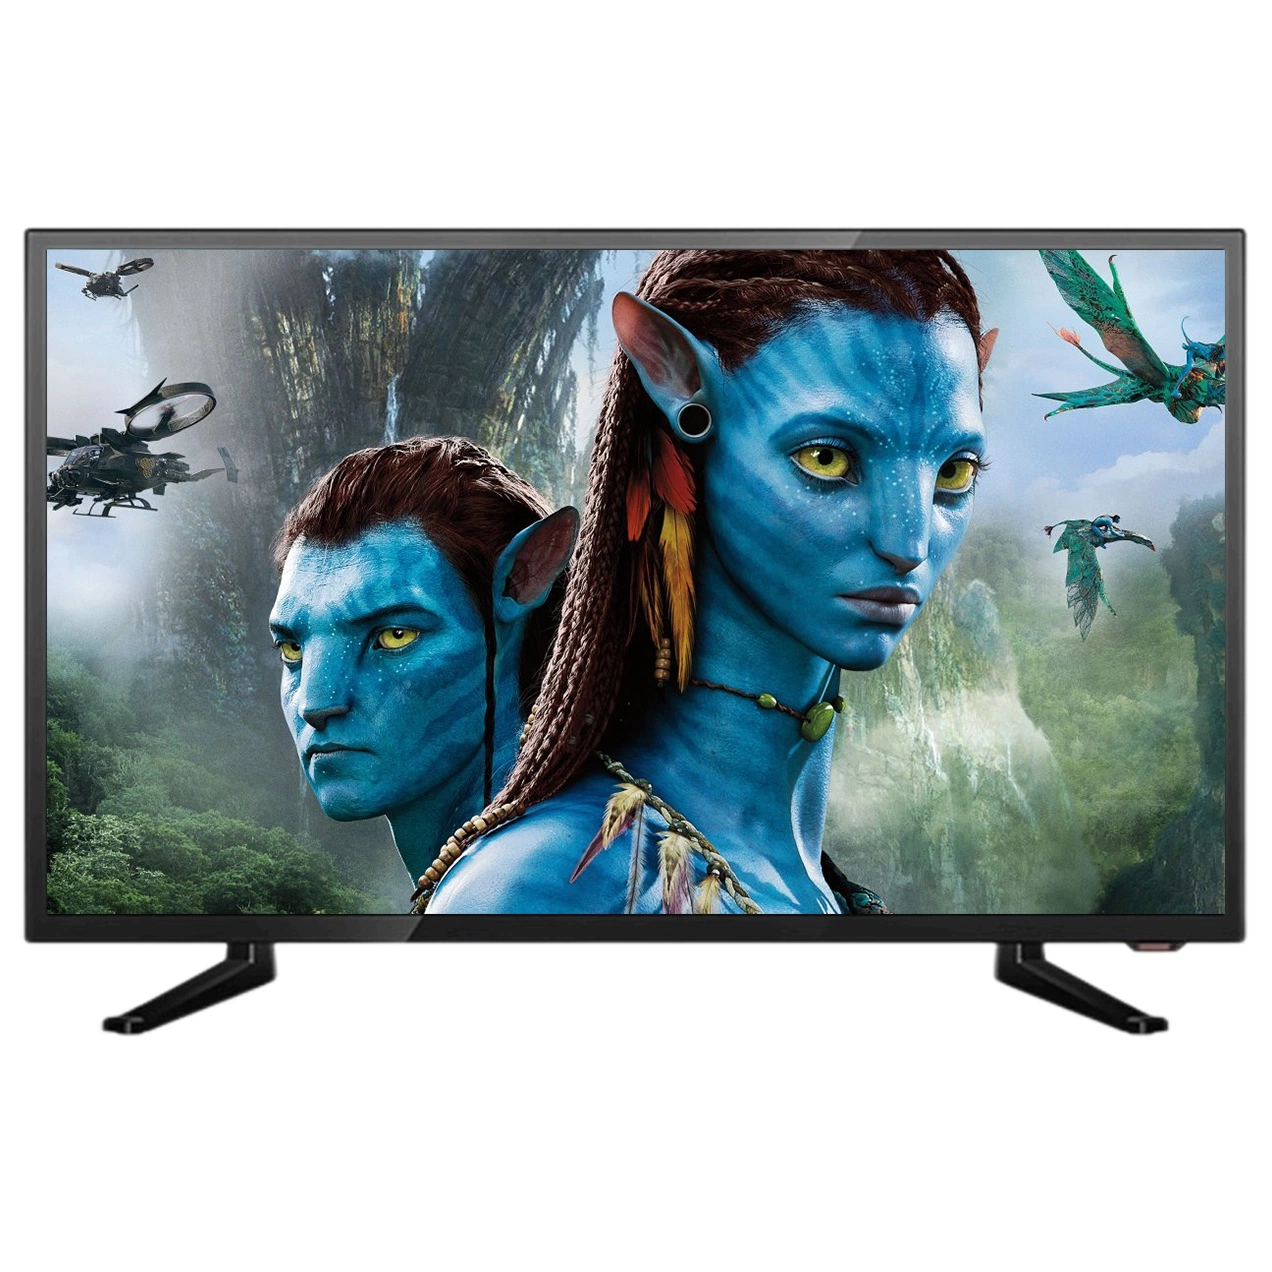 HD 24 32 43 50 Inch TV Android Smart Television Smart 32 Pouces Televizor Smart TV Pagaria 40inch LED Smart TV for Hote